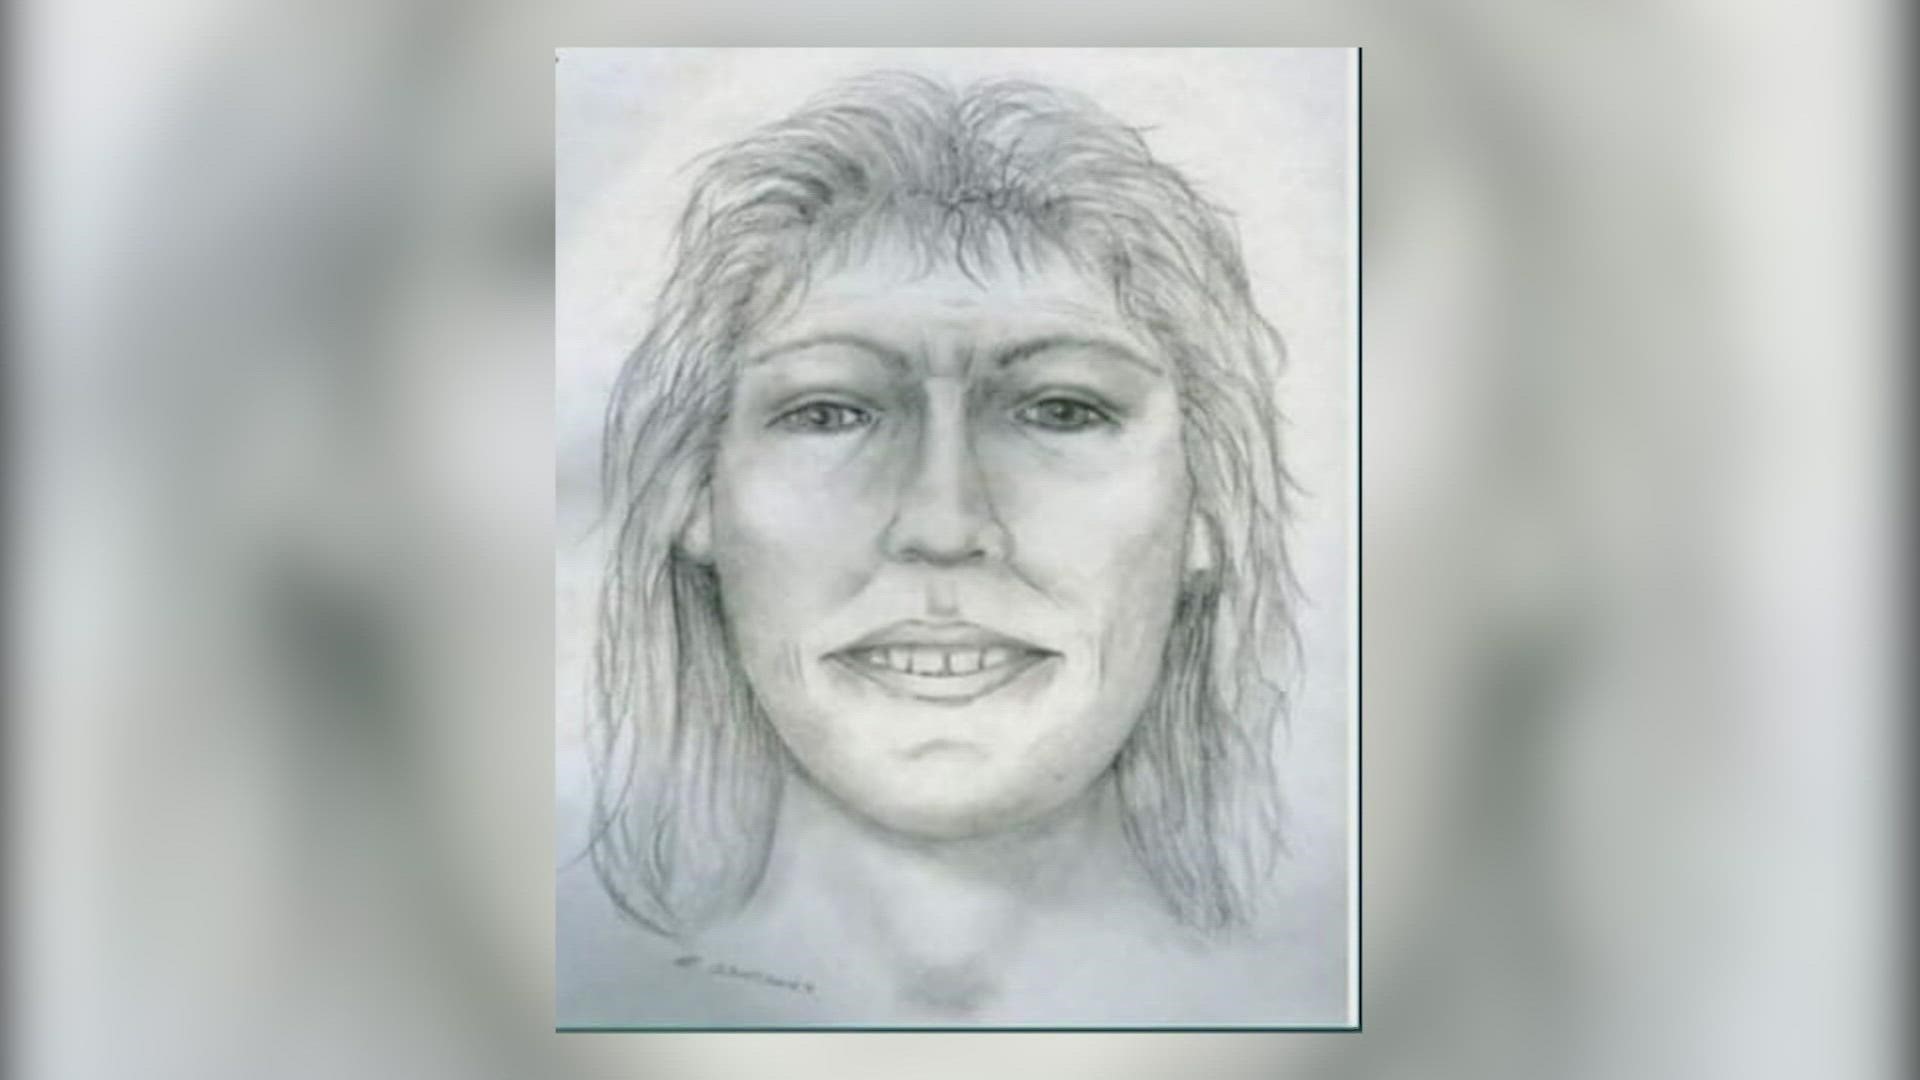 Shelly Rae Kephart's remains were identified through analysis of DNA on Tuesday.